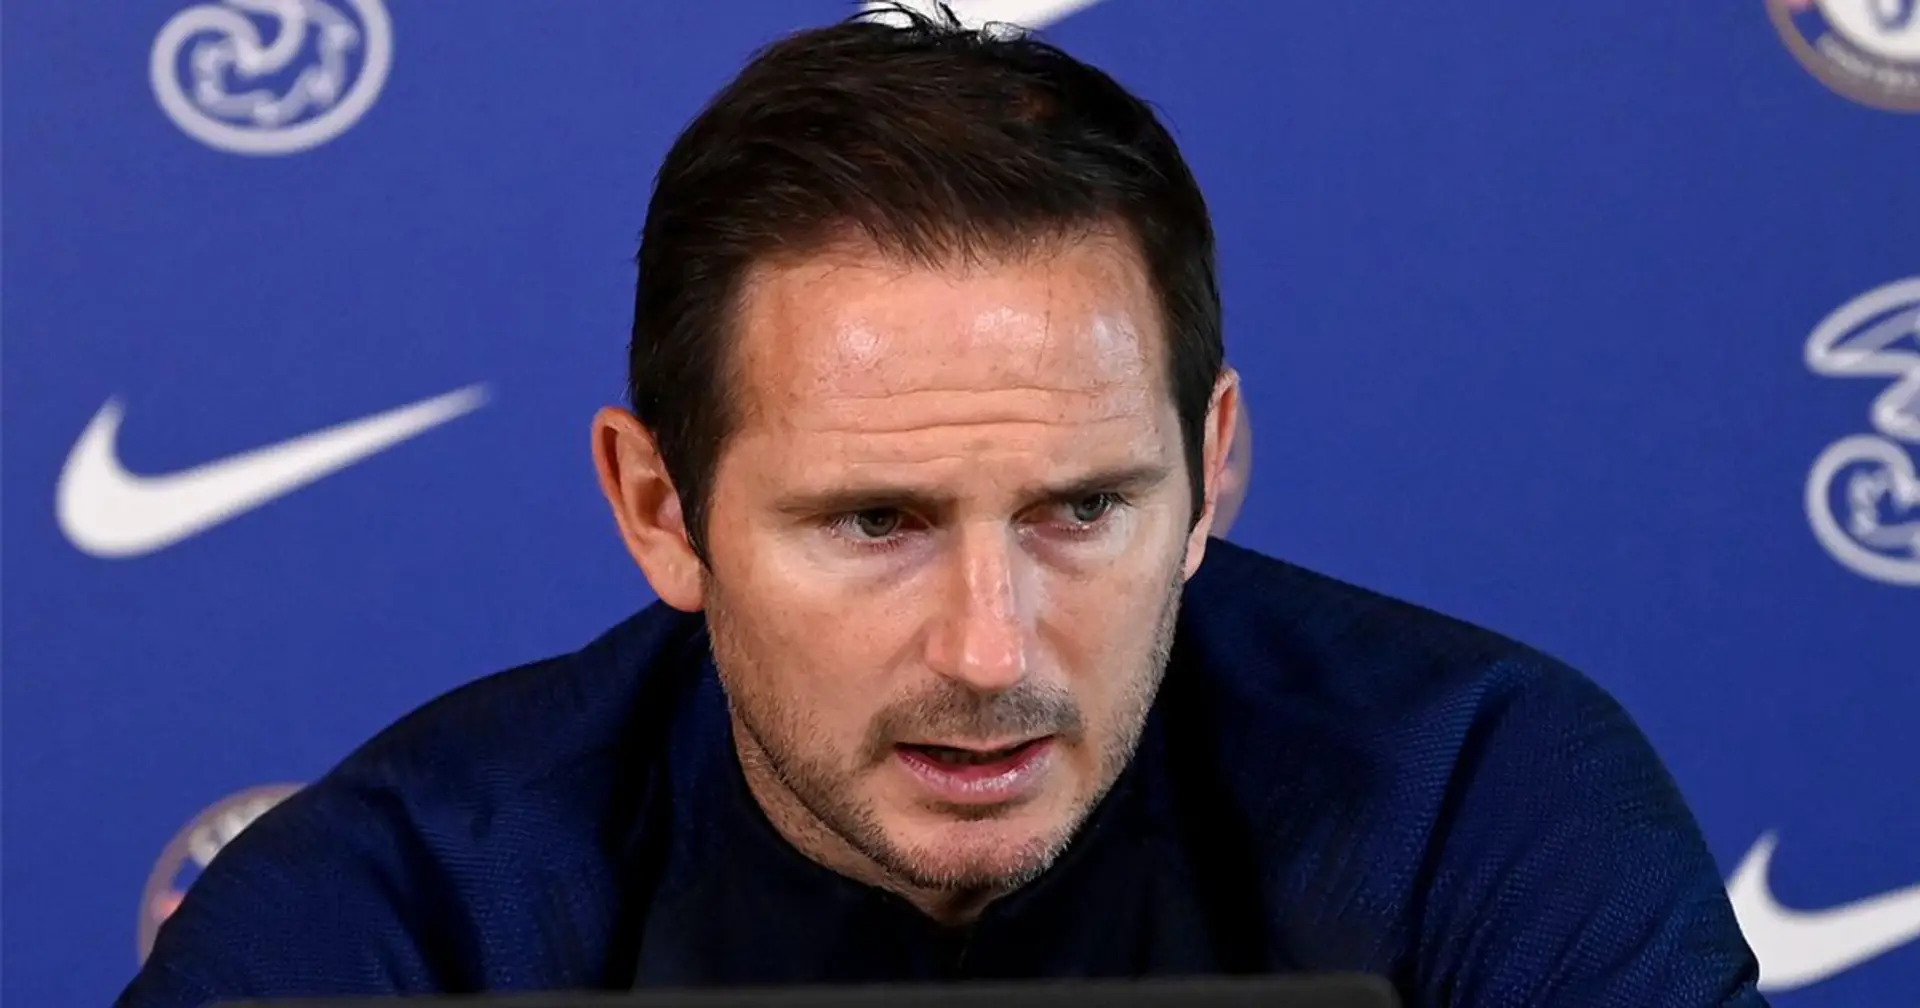 Lampard singles out 2 players who saved Chelsea points in 'nerve-wracking' game